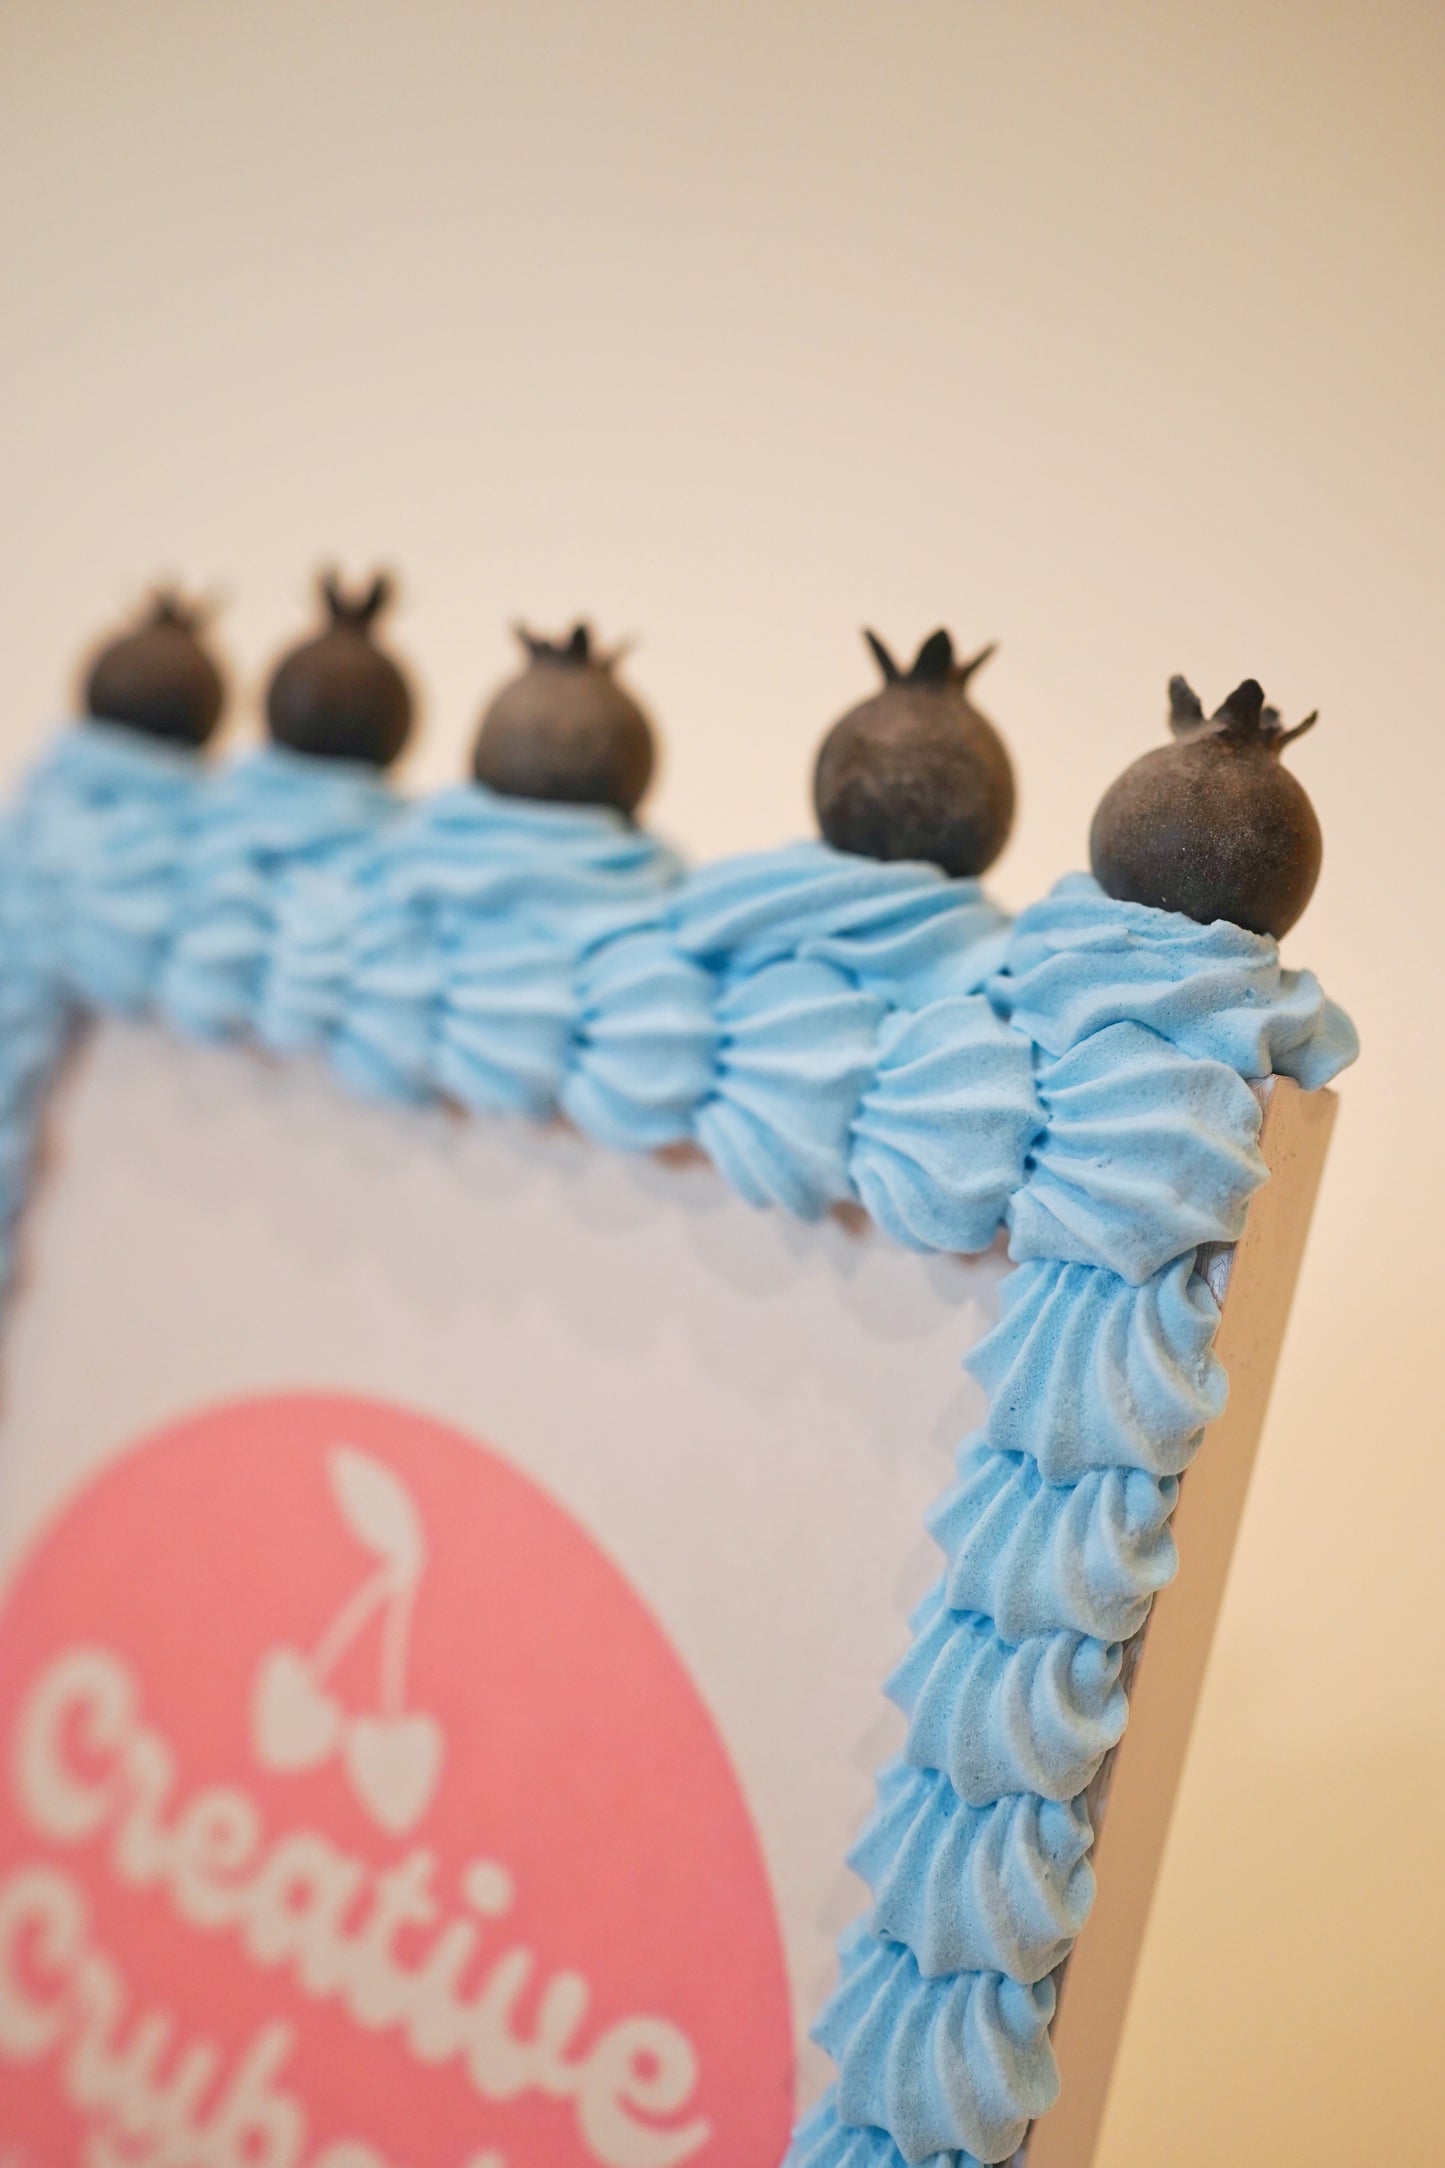 Blueberry Cake Picture Frame with Blue Frosting